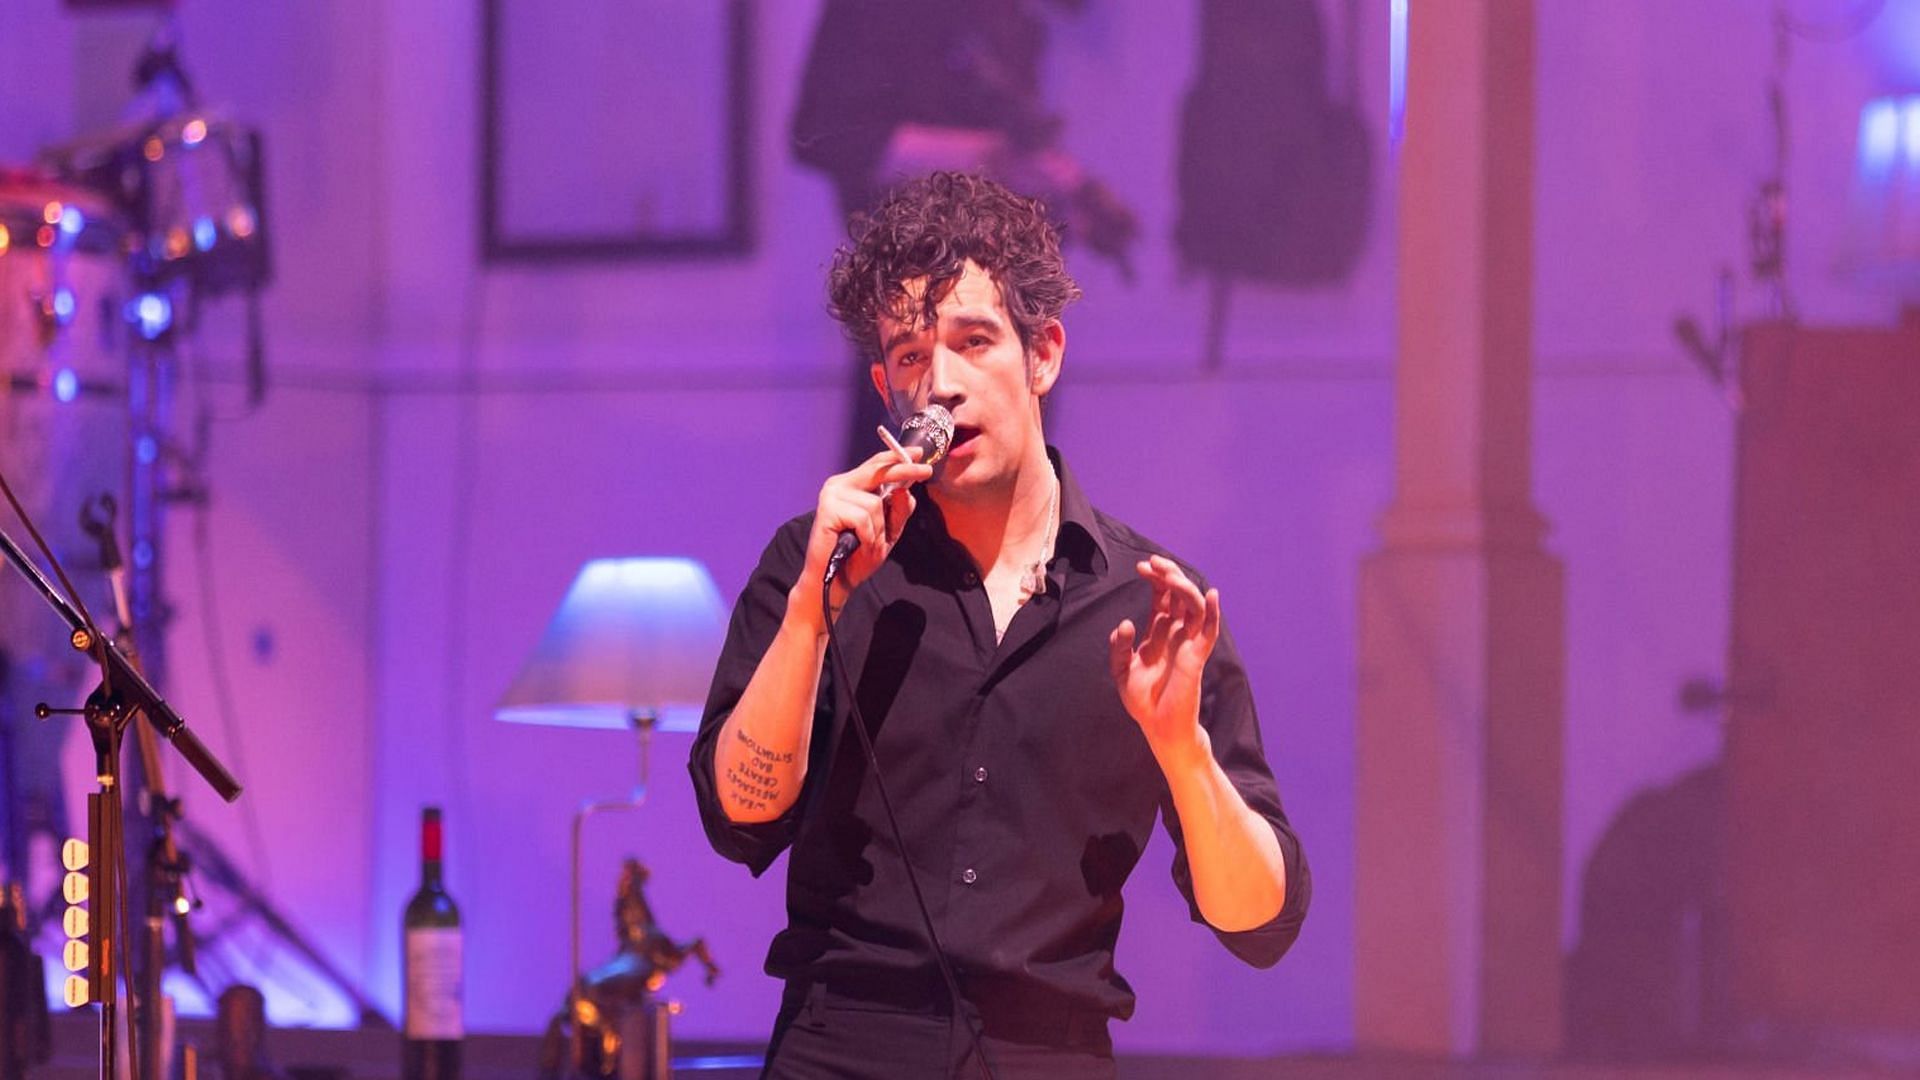 Matty Healy is in the news again for his antics (Image via Getty Images)